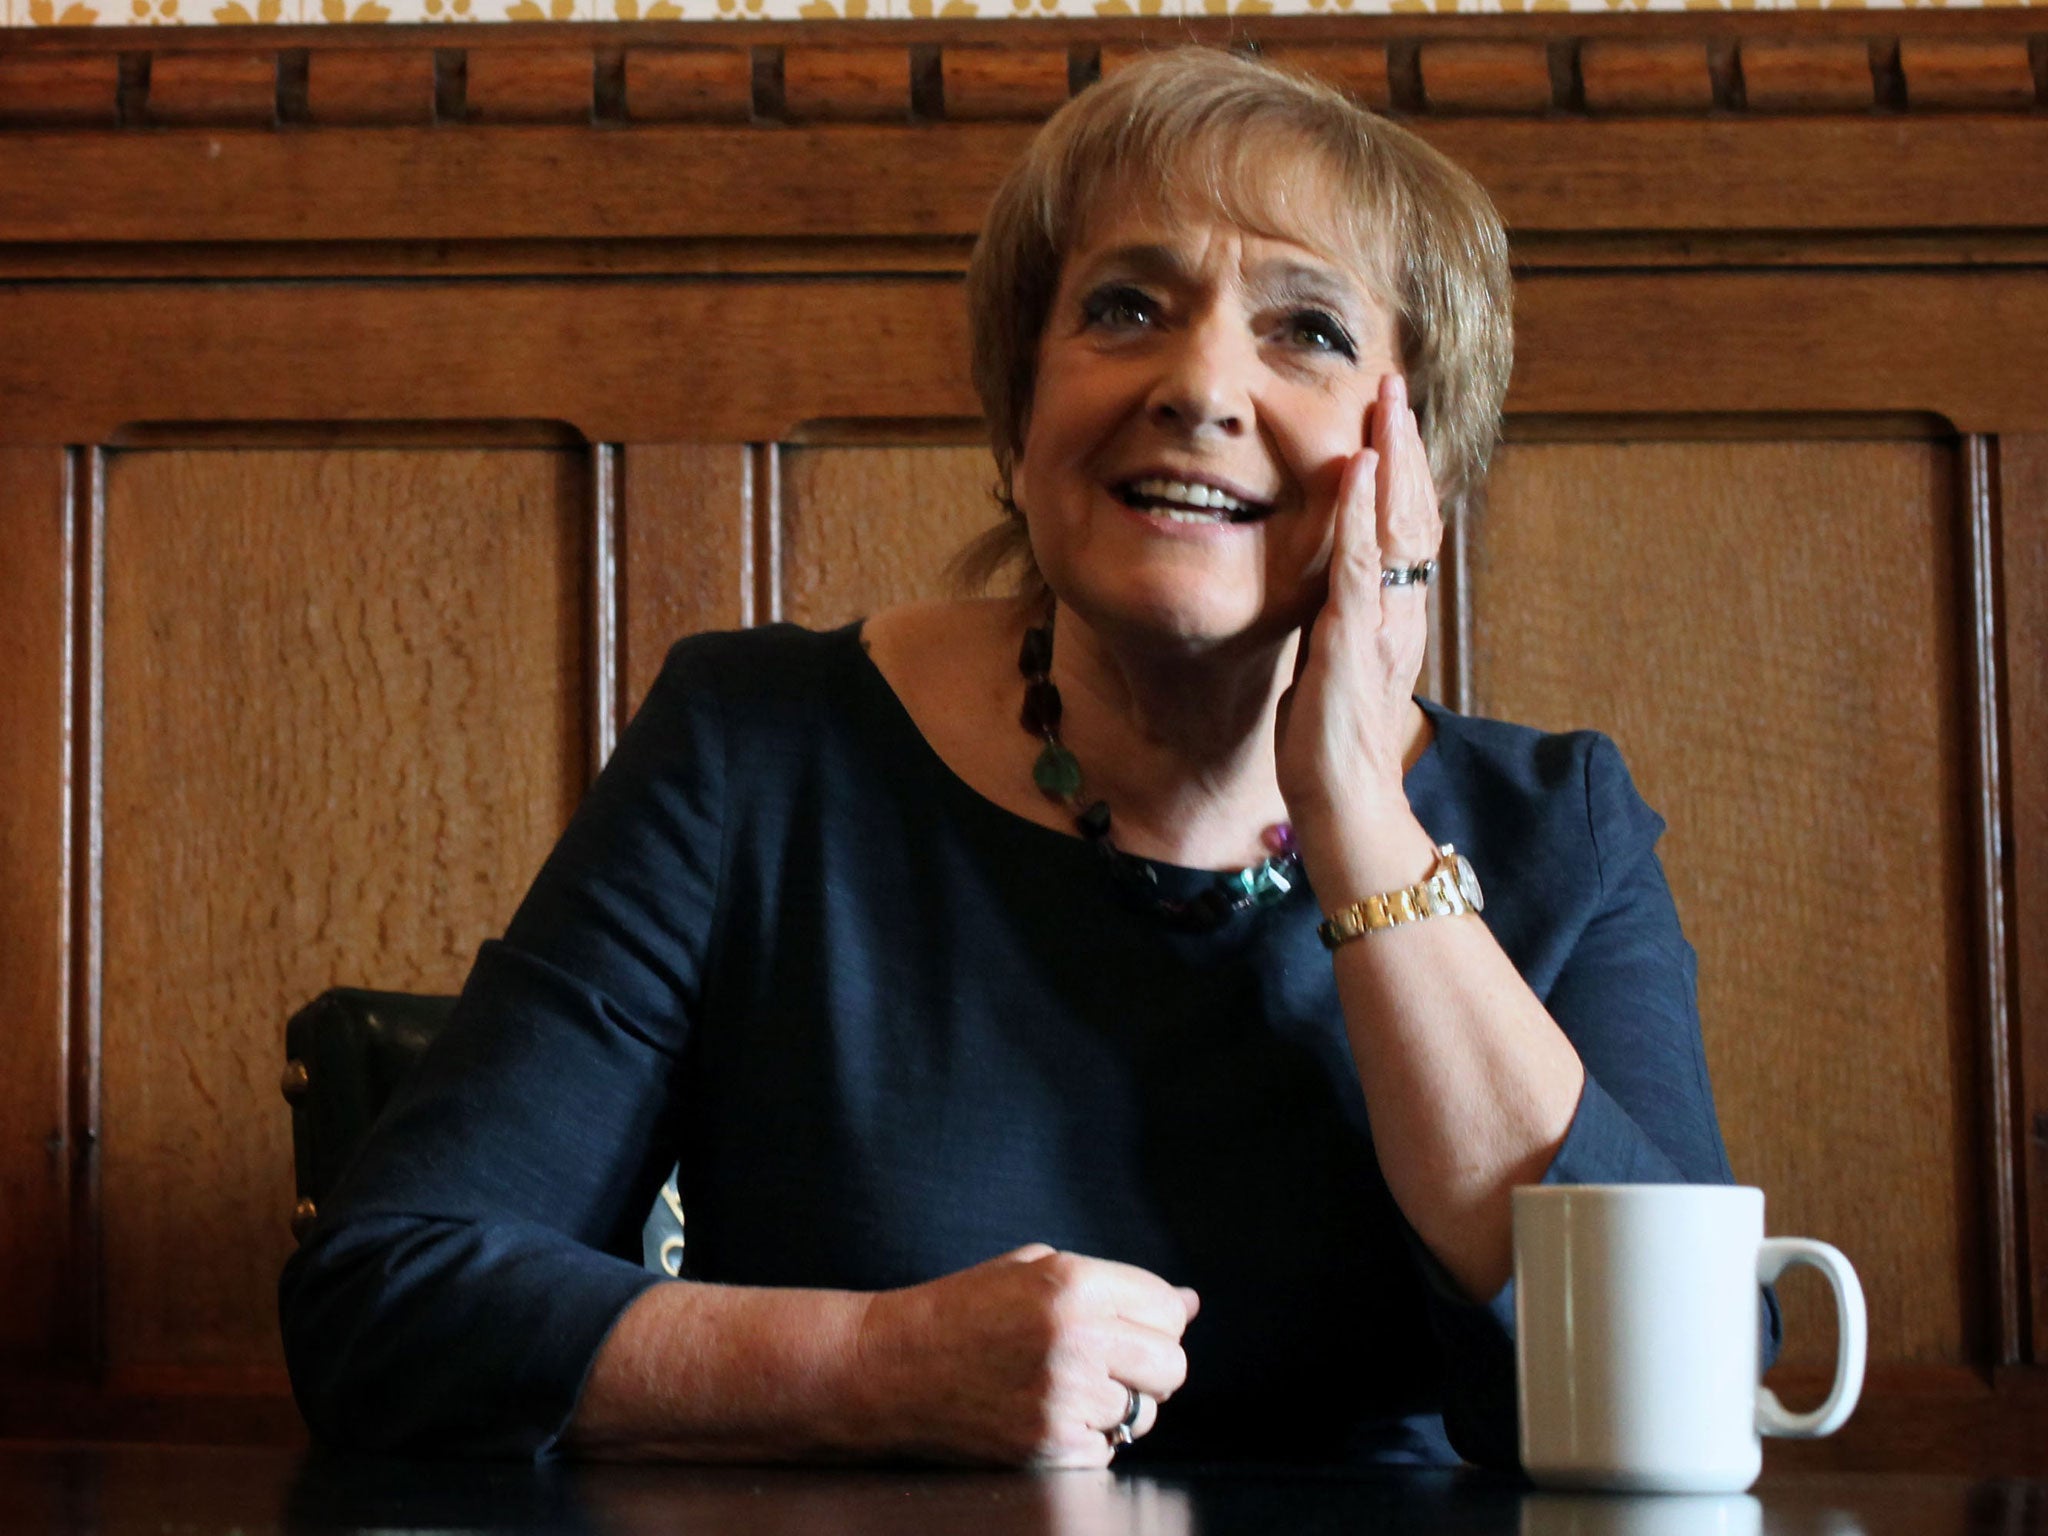 Margaret Hodge stepped up her campaign against tax avoidance, suggesting that the government contracts should not be given to accountancy firms that help tax avoiders